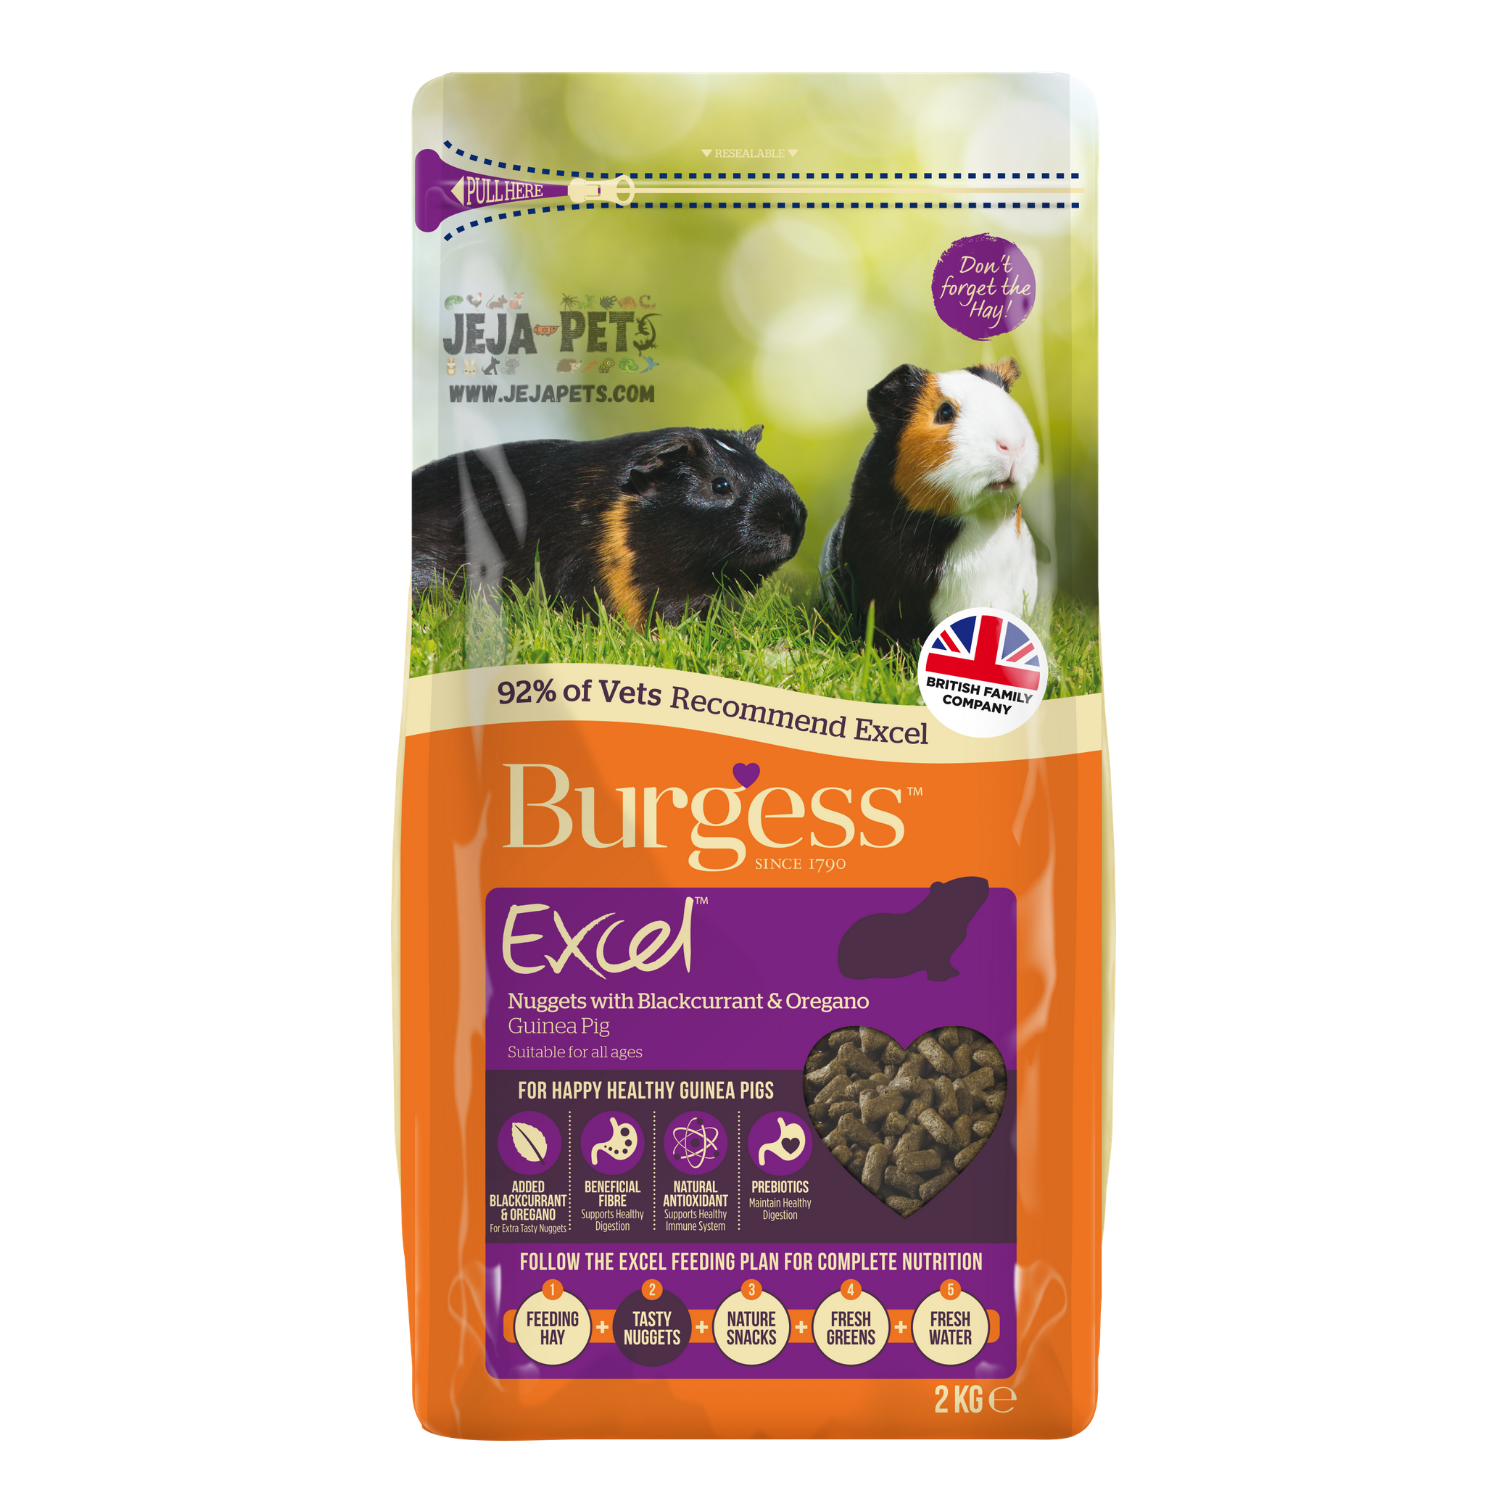 [SAMPLE] Burgess Excel Adult Guinea Pig Nuggets with Blackcurrent and Oregano - 200g